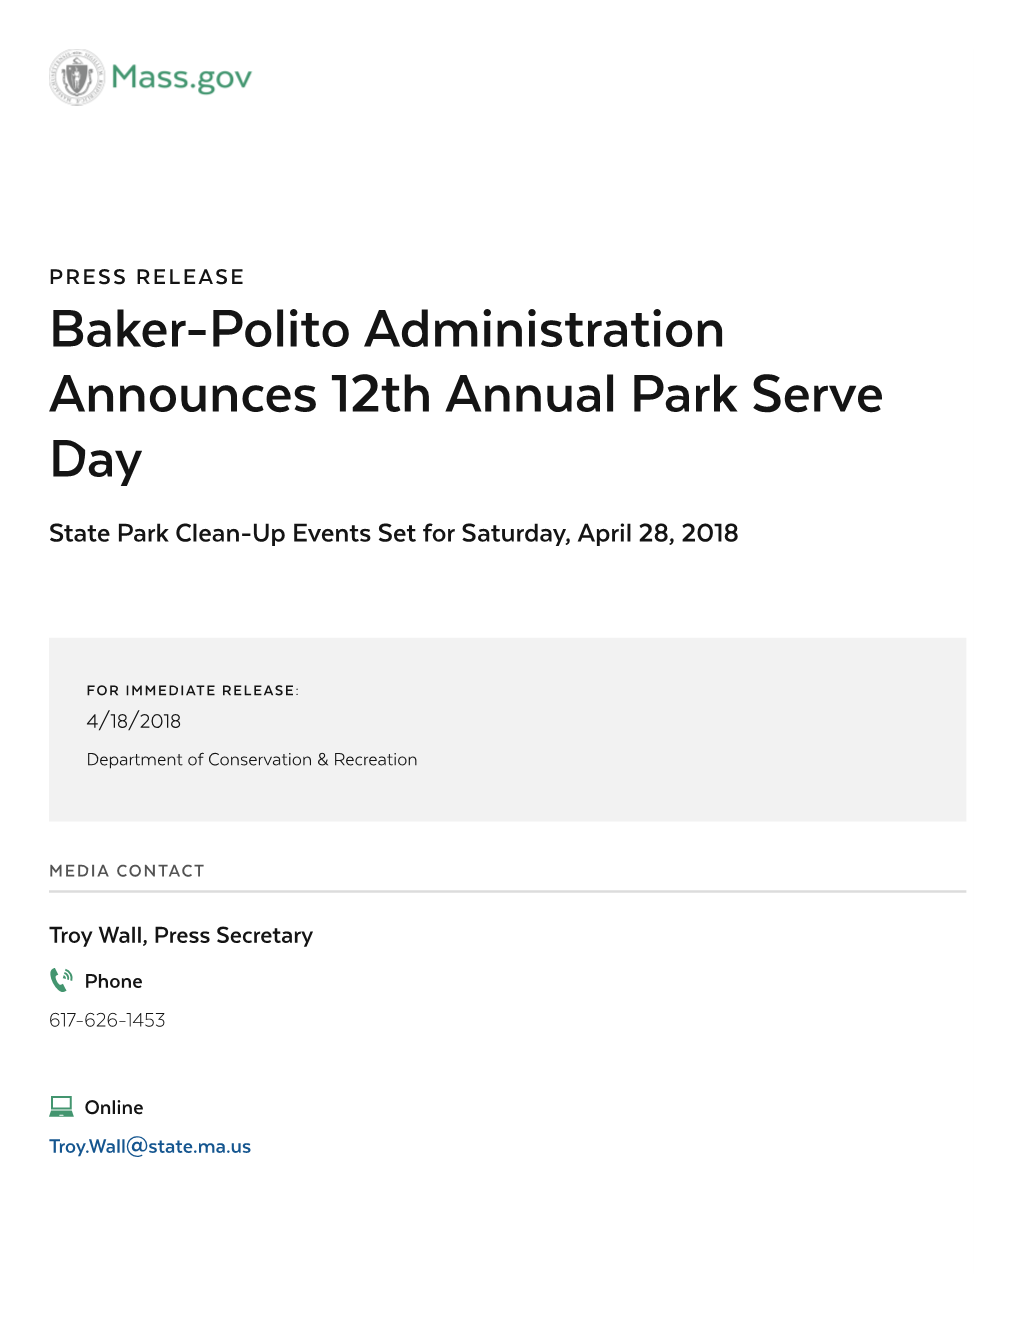 Baker-Polito Administration Announces 12Th Annual Park Serve Day State Park Clean-Up Events Set for Saturday, April 28, 2018